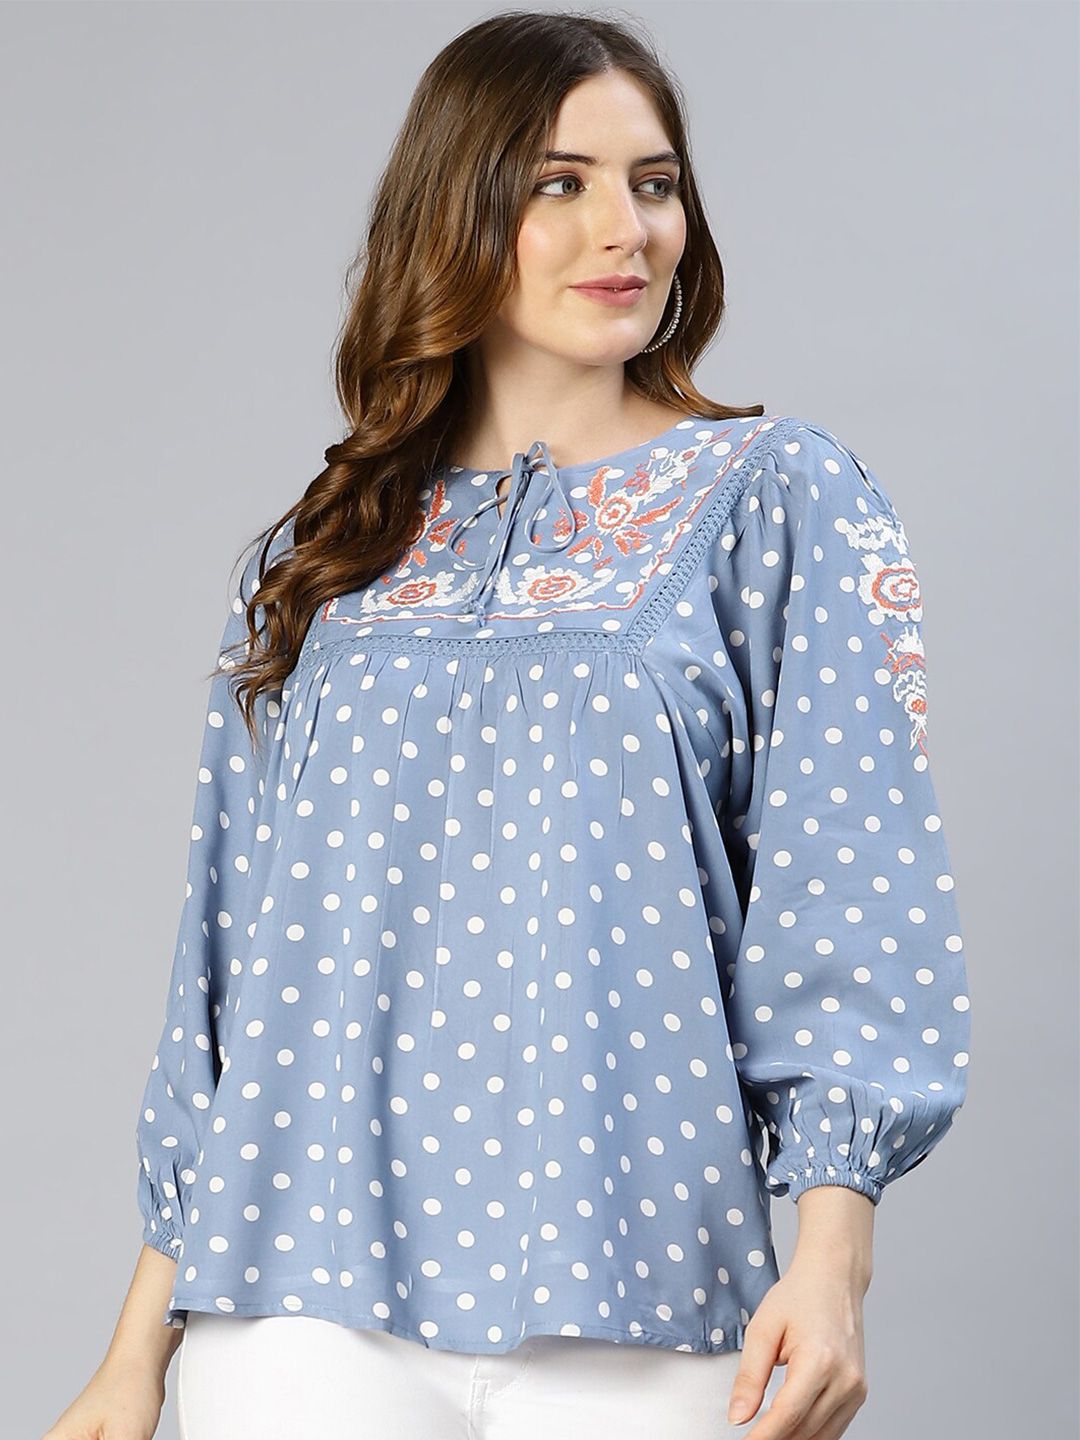 Oxolloxo Women Blue Polka Dot Printed Tie-Up Neck Top Price in India